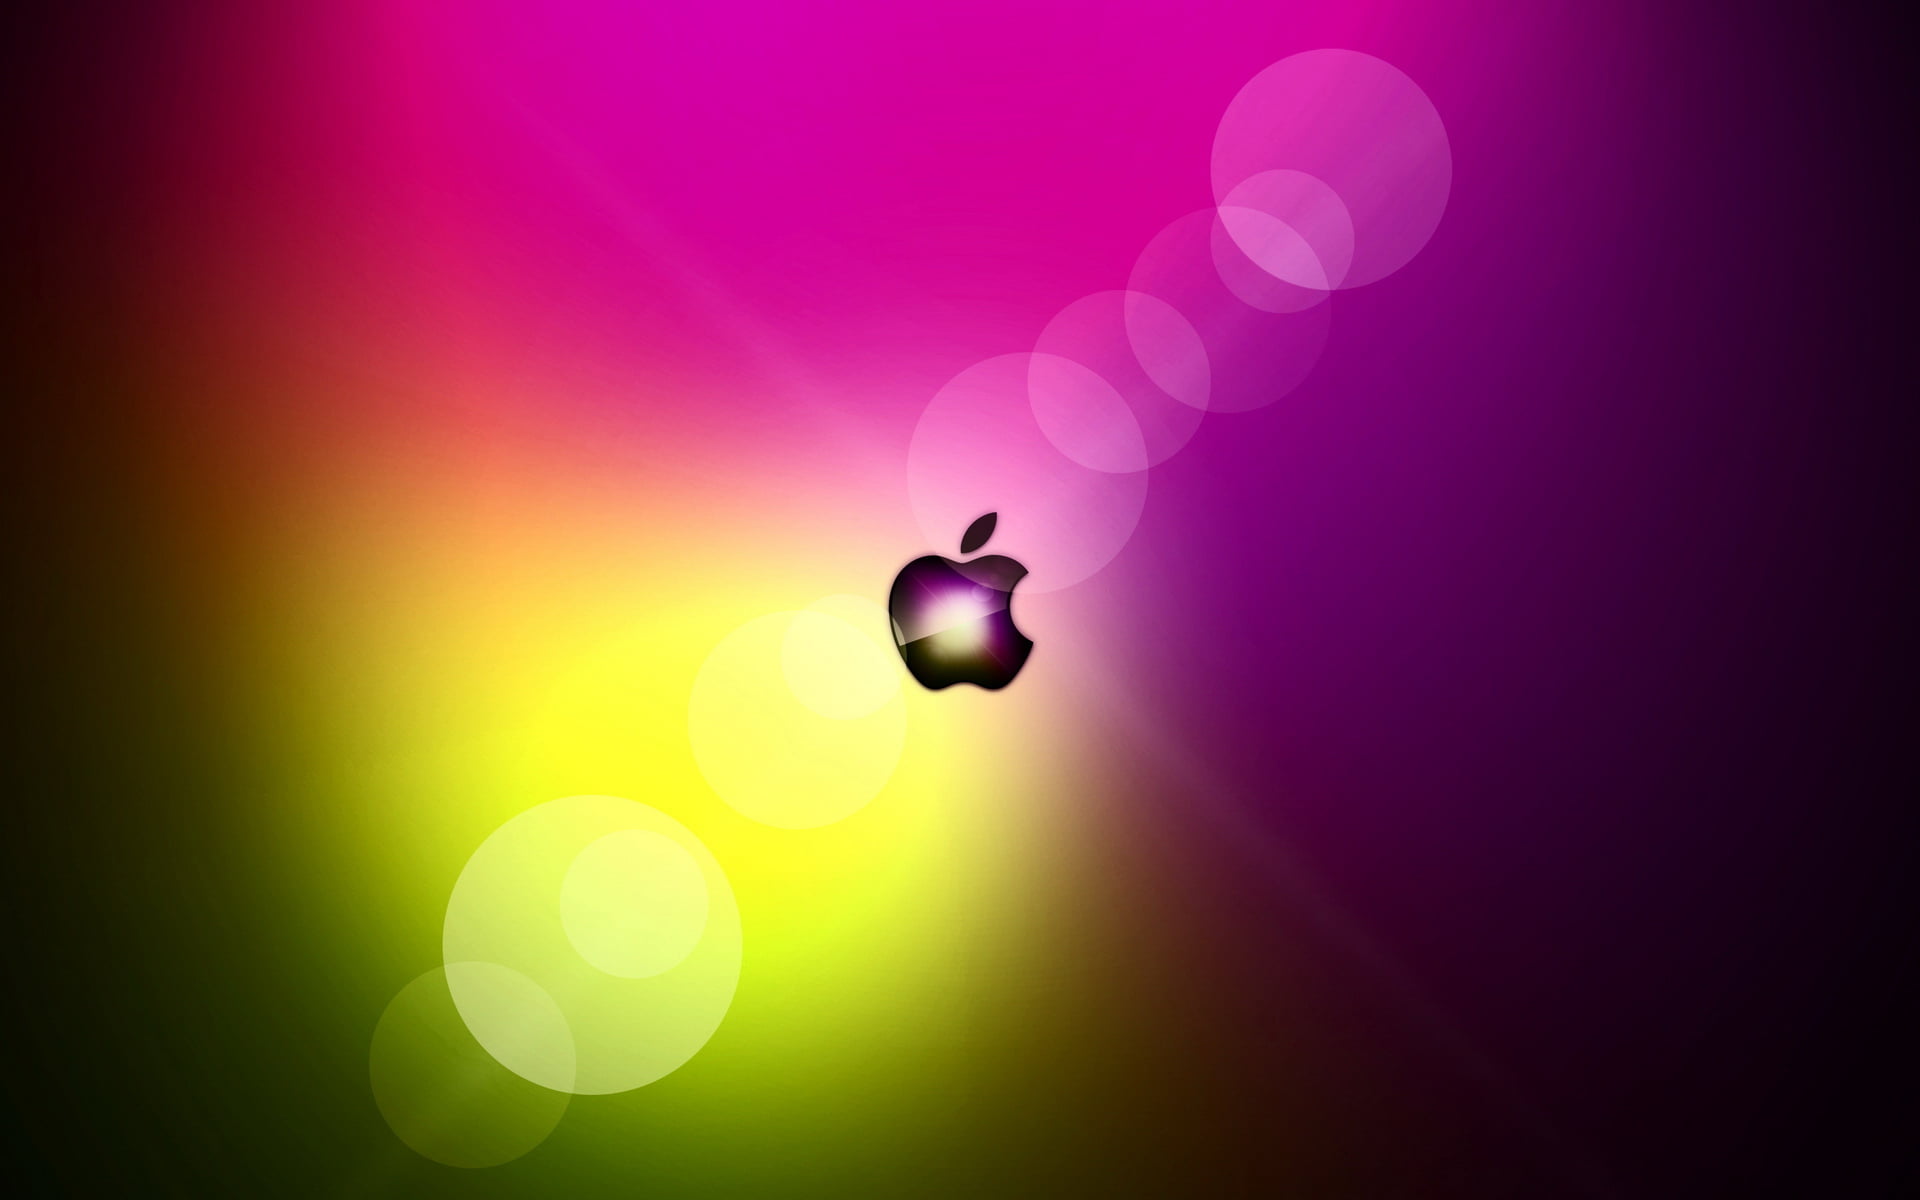 Shine Apple, black and pink Apple logo, Computers, colorful, lens flare